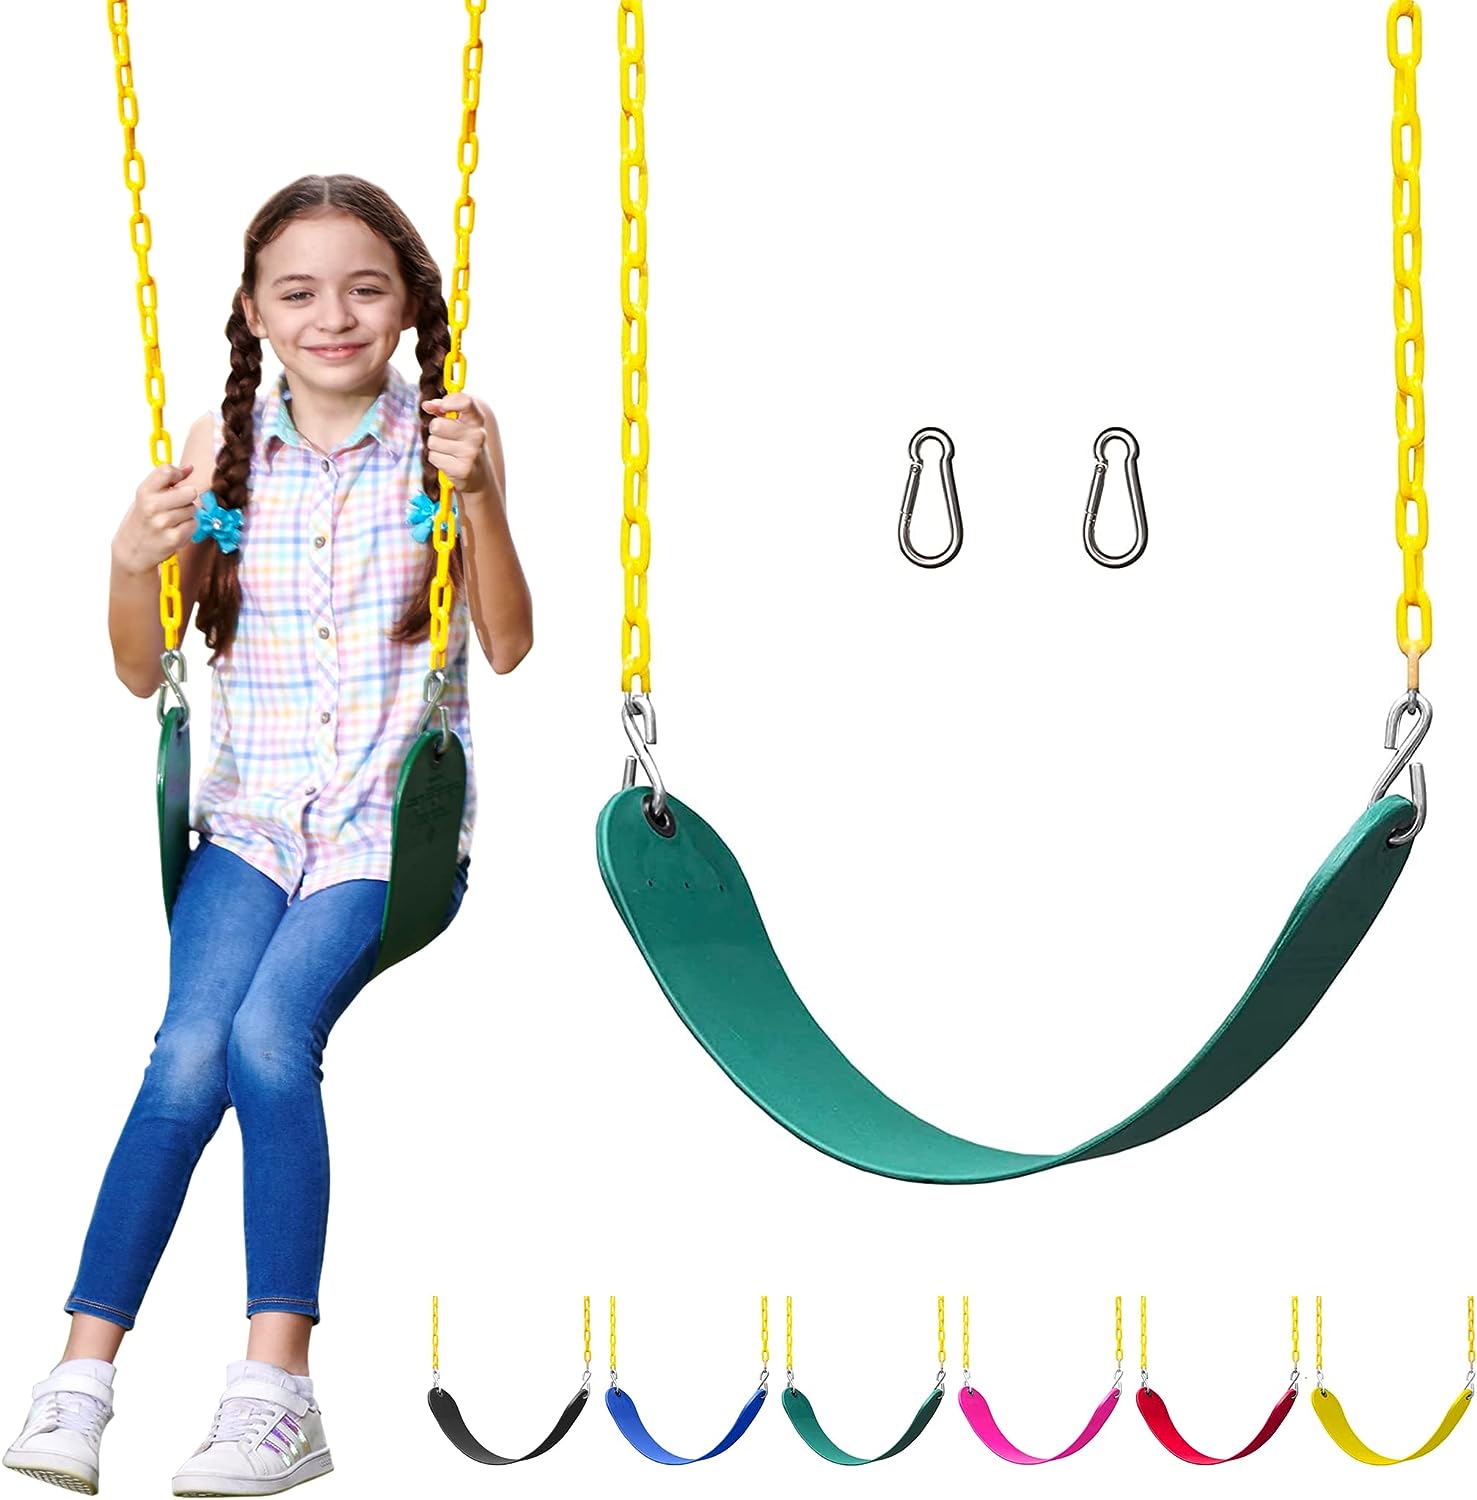 Jungle Gym Kingdom Swing for Outdoor Swing Set